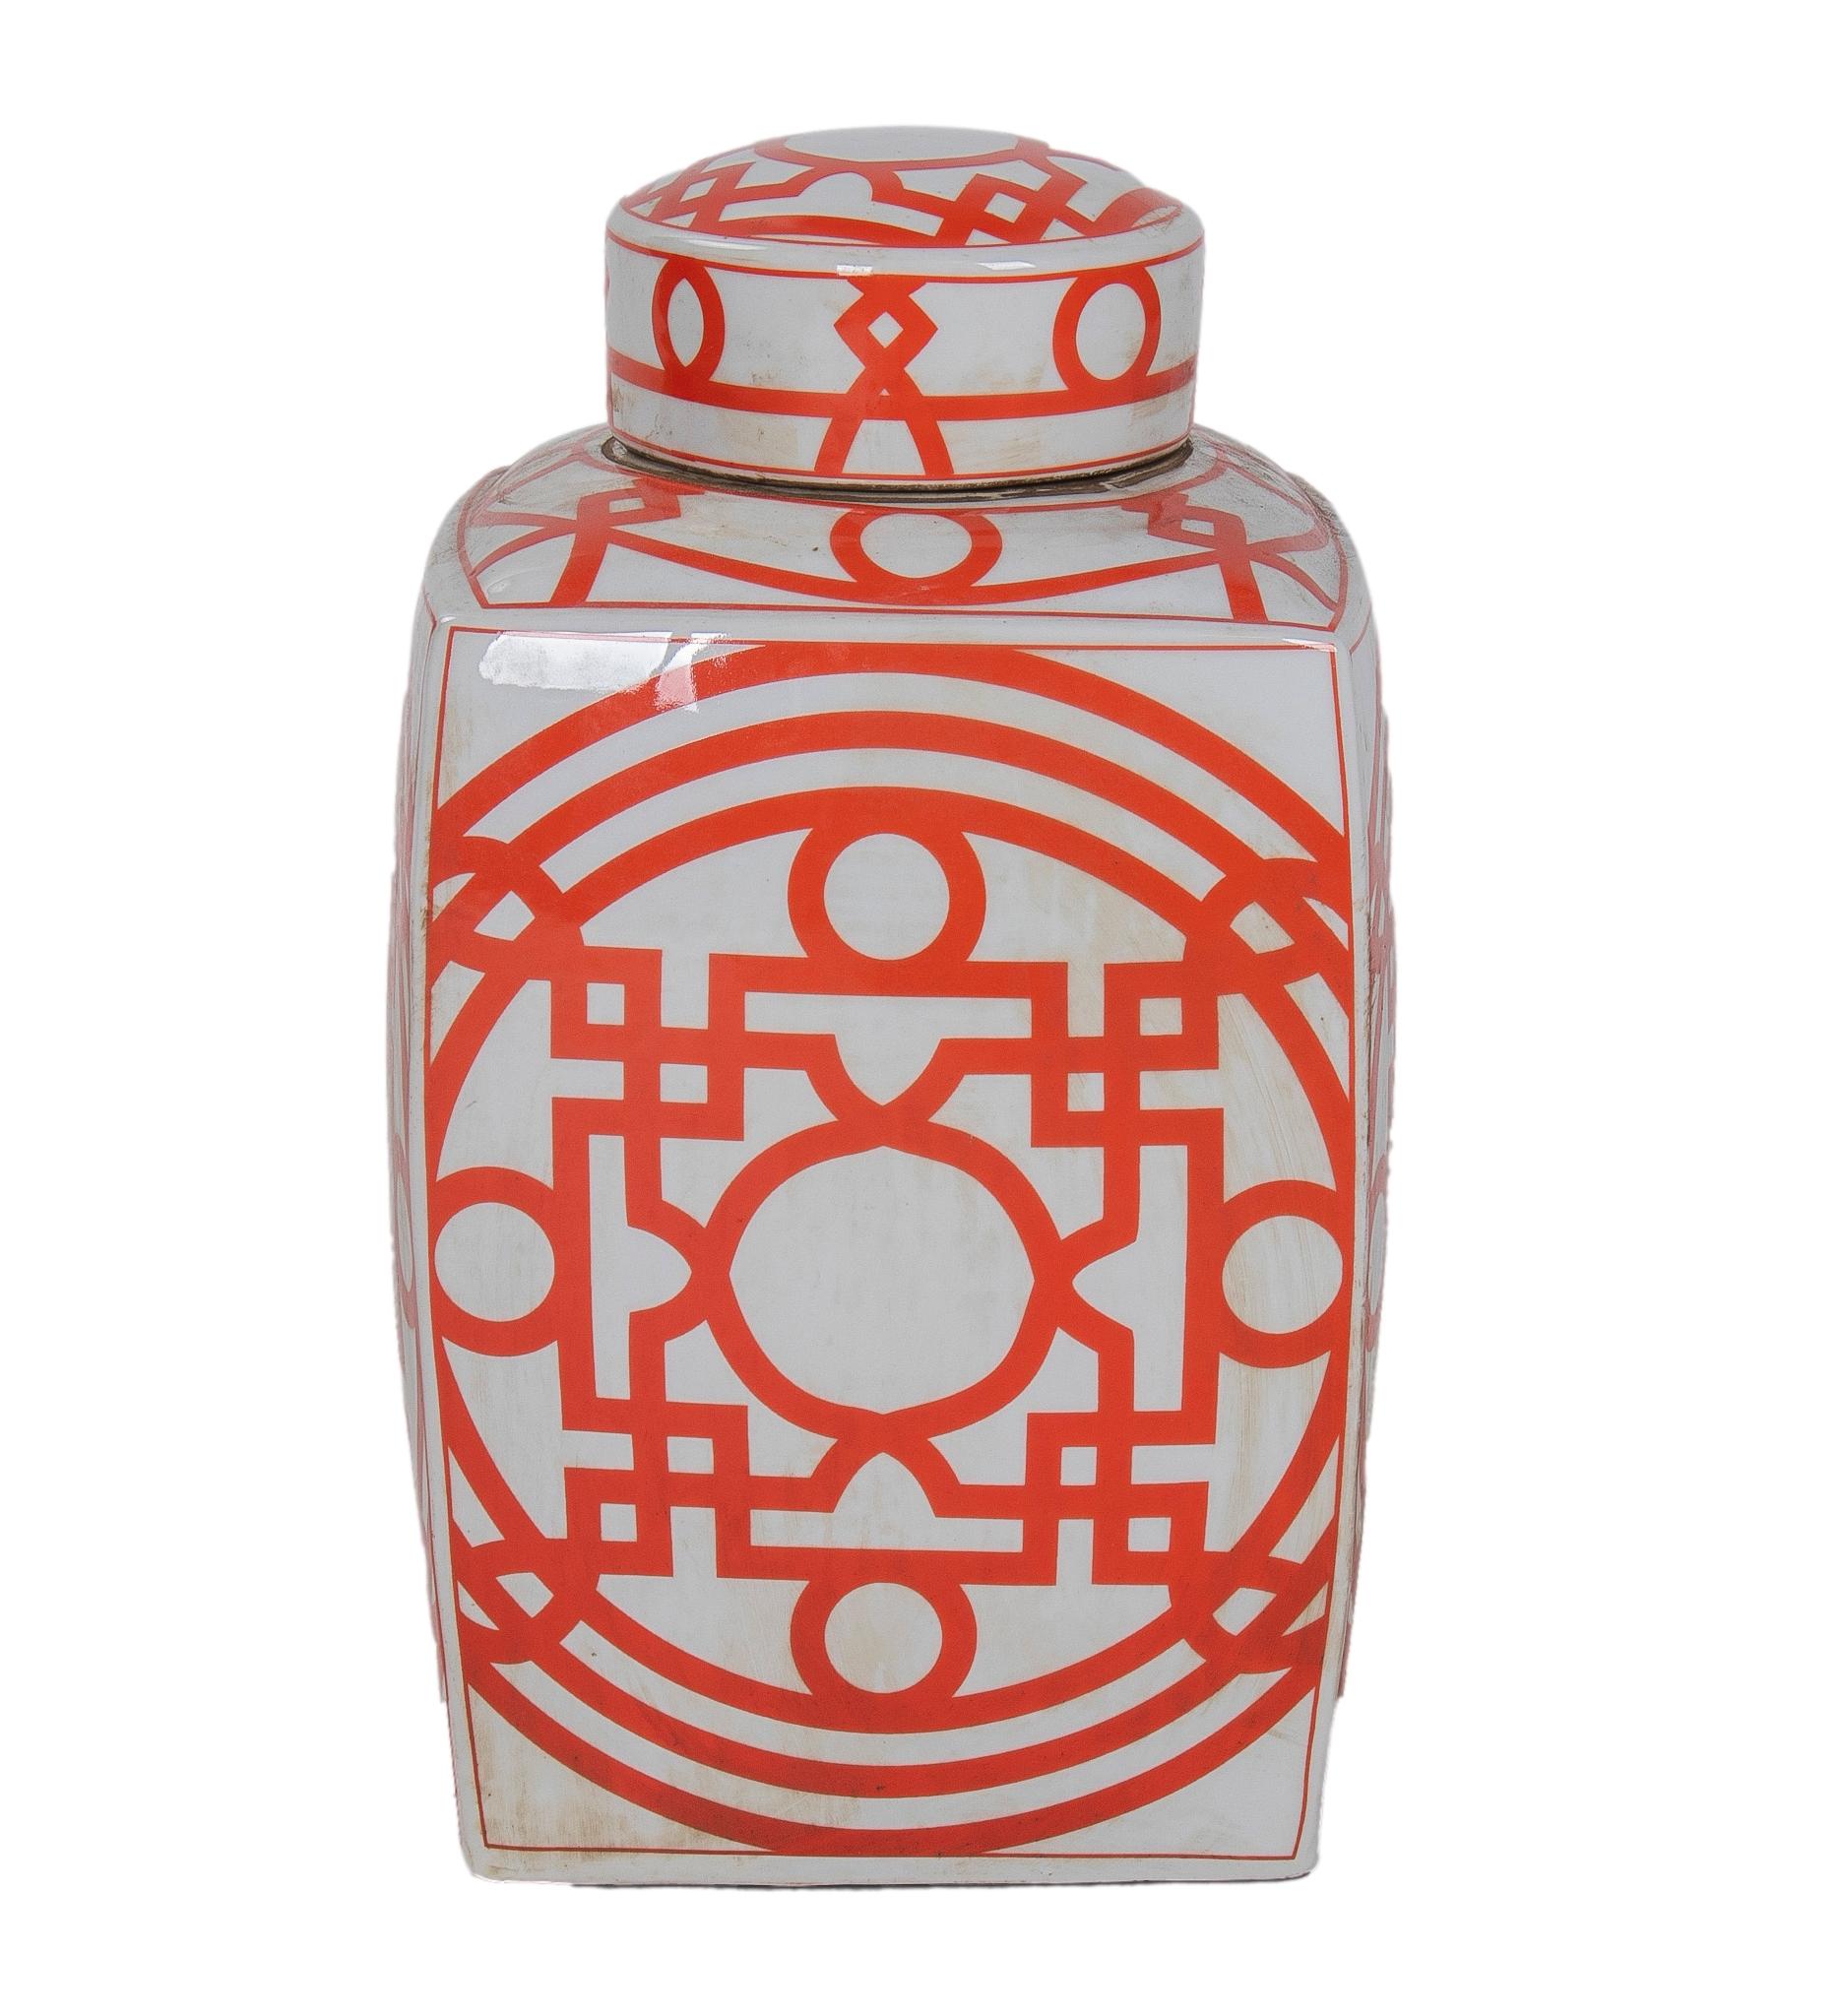 Pair of Asian white glazed porcelain urns with red geometric decorations and lids.